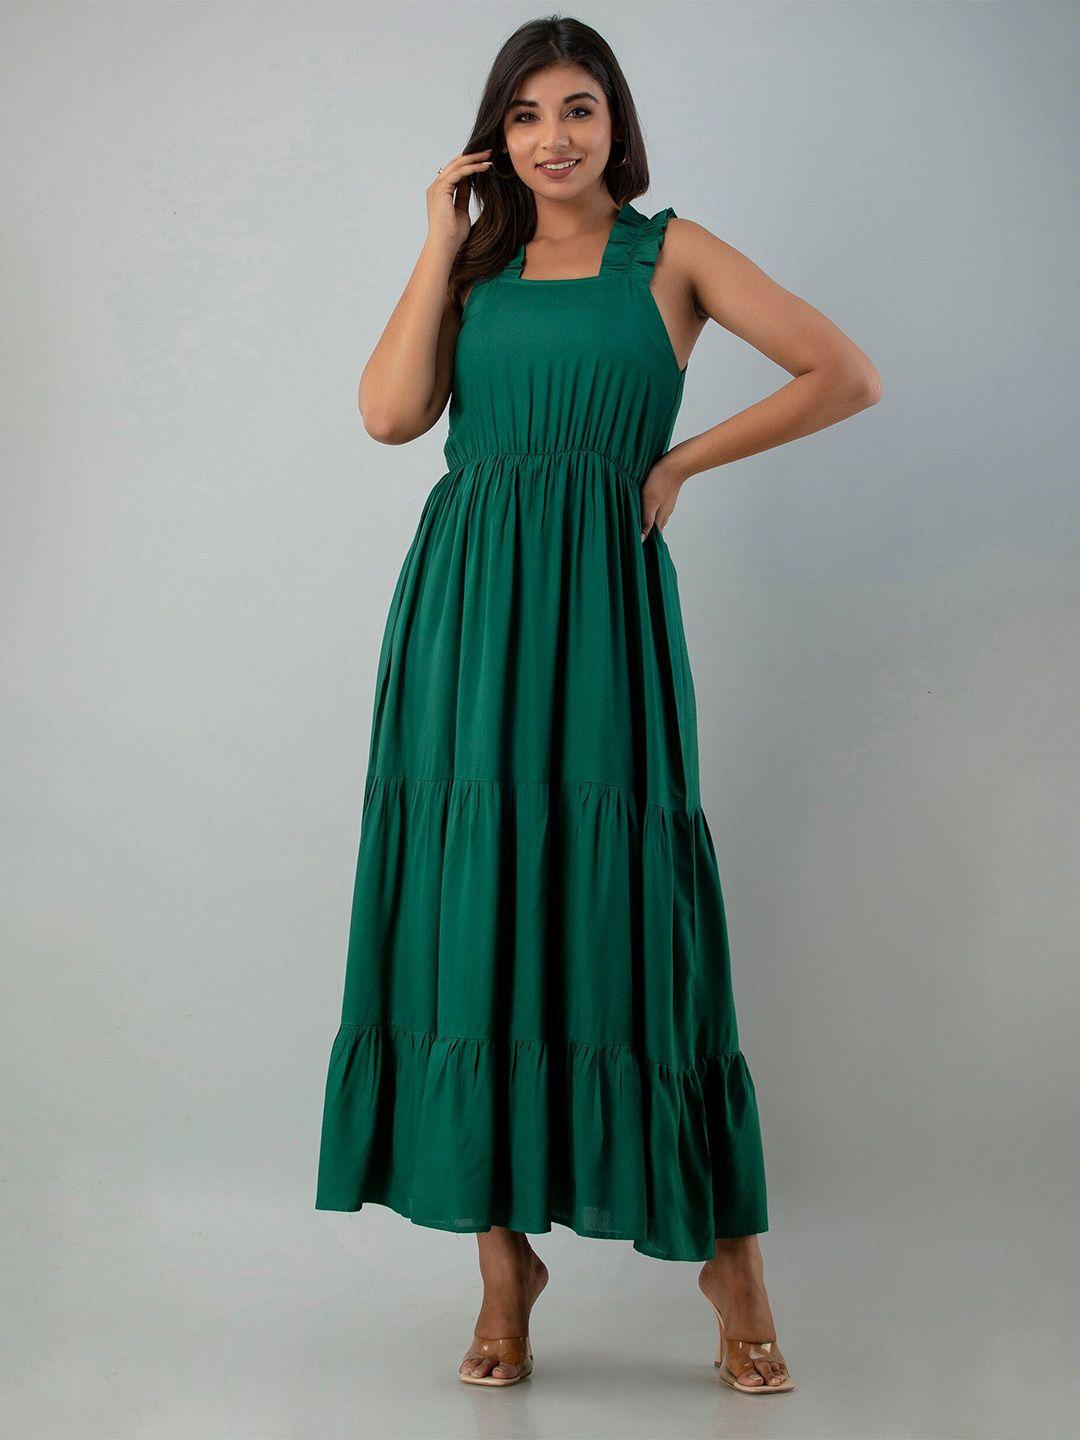 indianic shoulder strap tiered maxi dress